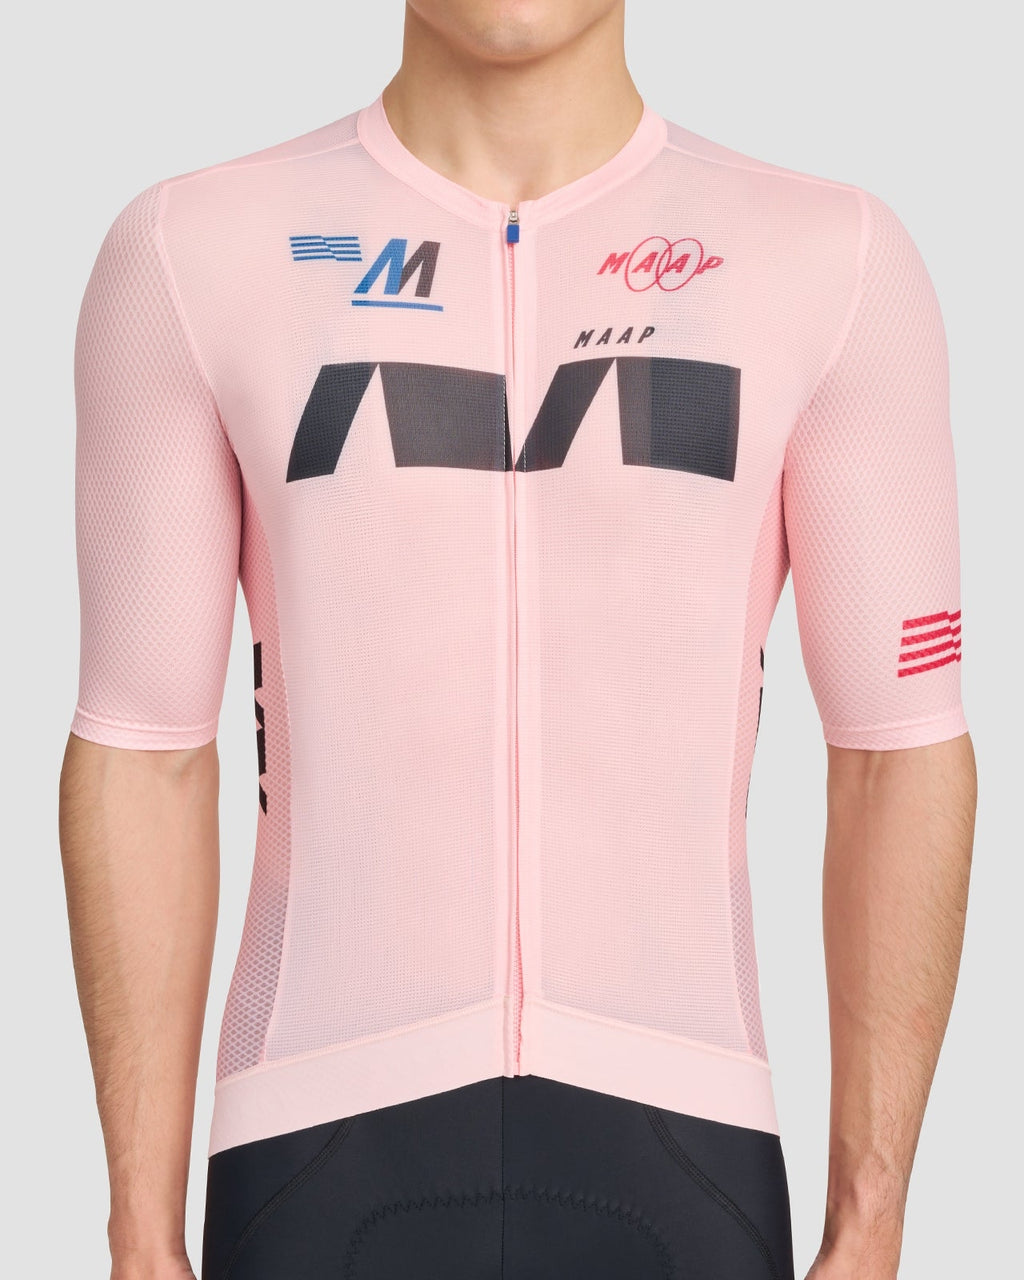 MAAP Trace Pro Air Jersey